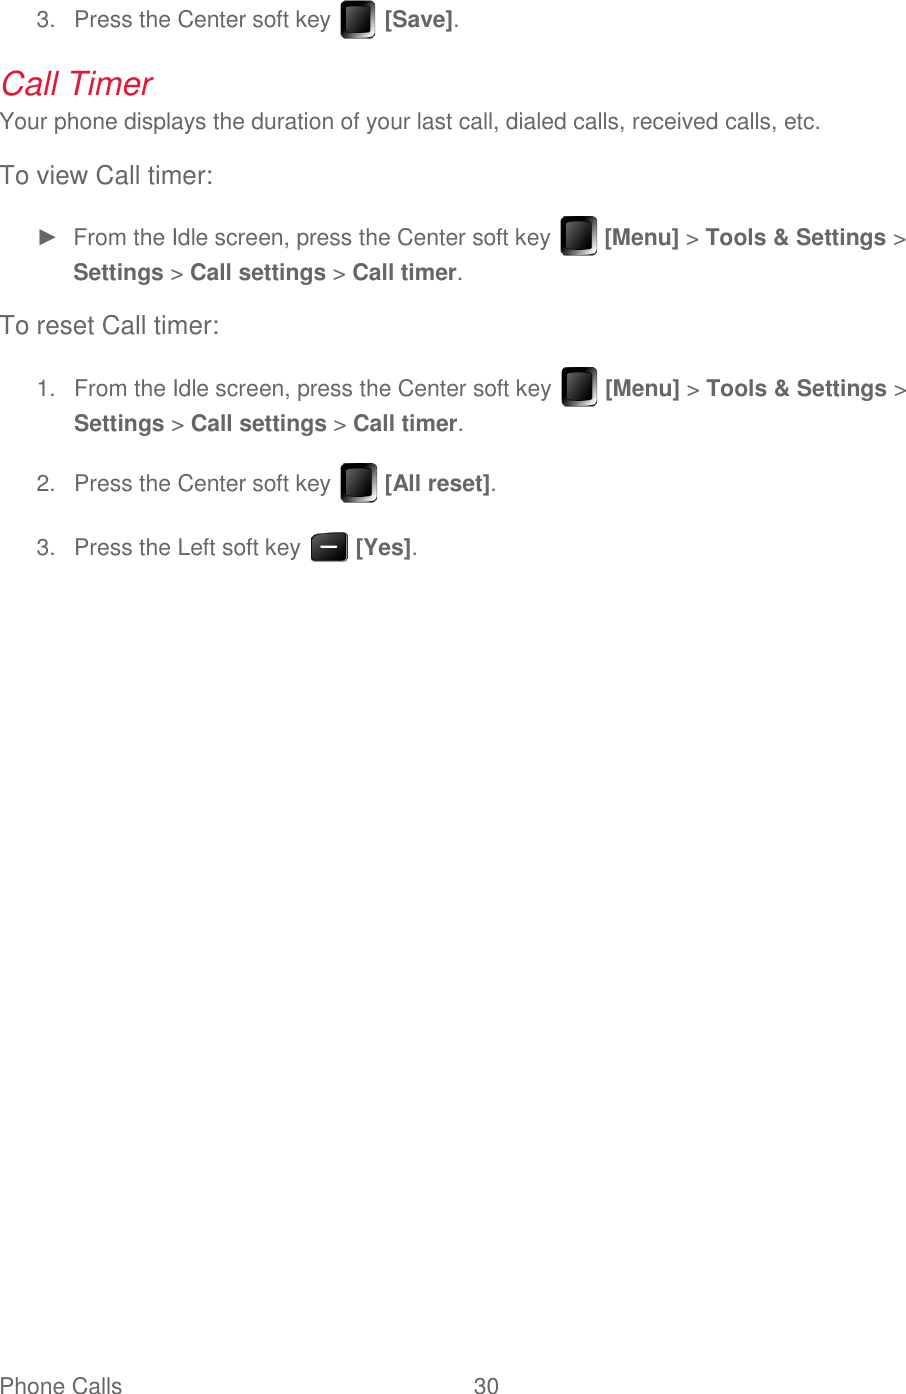 Phone Calls  30     Press the Center soft key   [Save]. 3.Call Timer Your phone displays the duration of your last call, dialed calls, received calls, etc. To view Call timer: ►  From the Idle screen, press the Center soft key   [Menu] &gt; Tools &amp; Settings &gt; Settings &gt; Call settings &gt; Call timer. To reset Call timer:   From the Idle screen, press the Center soft key   [Menu] &gt; Tools &amp; Settings &gt; 1.Settings &gt; Call settings &gt; Call timer.   Press the Center soft key   [All reset]. 2.  Press the Left soft key   [Yes]. 3.